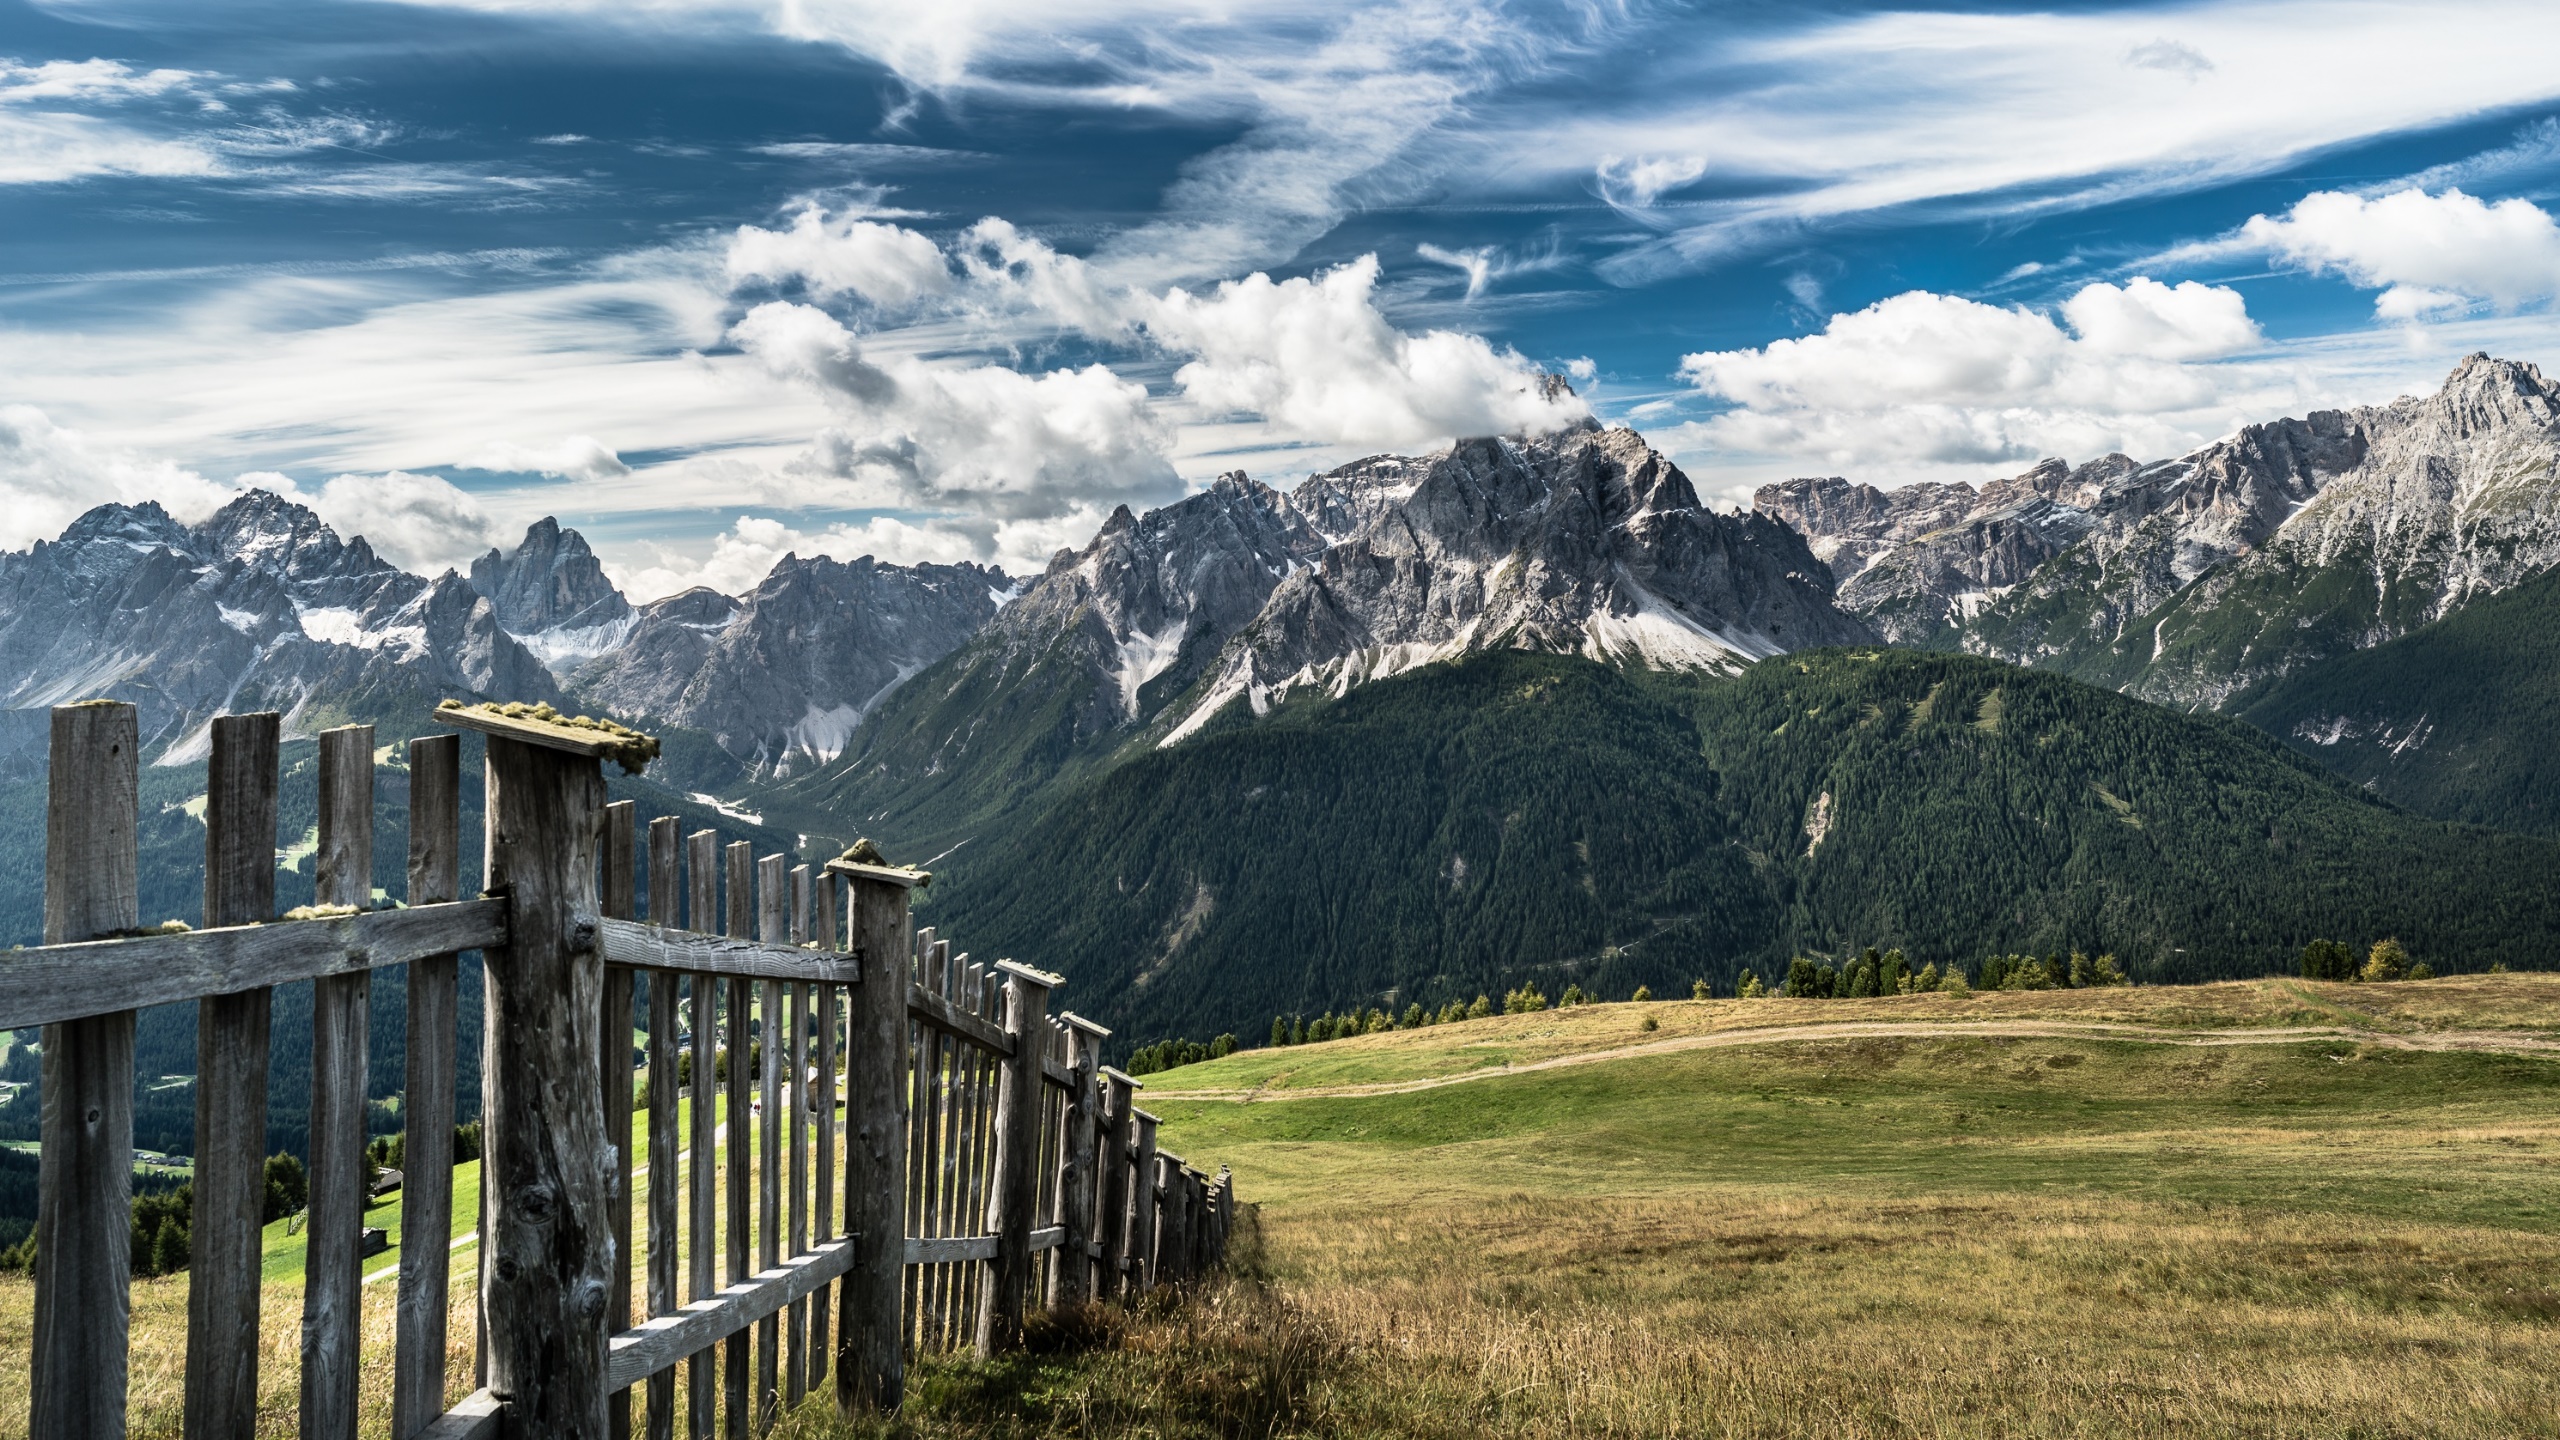 General 2560x1440 fence sky nature landscape mountains clouds